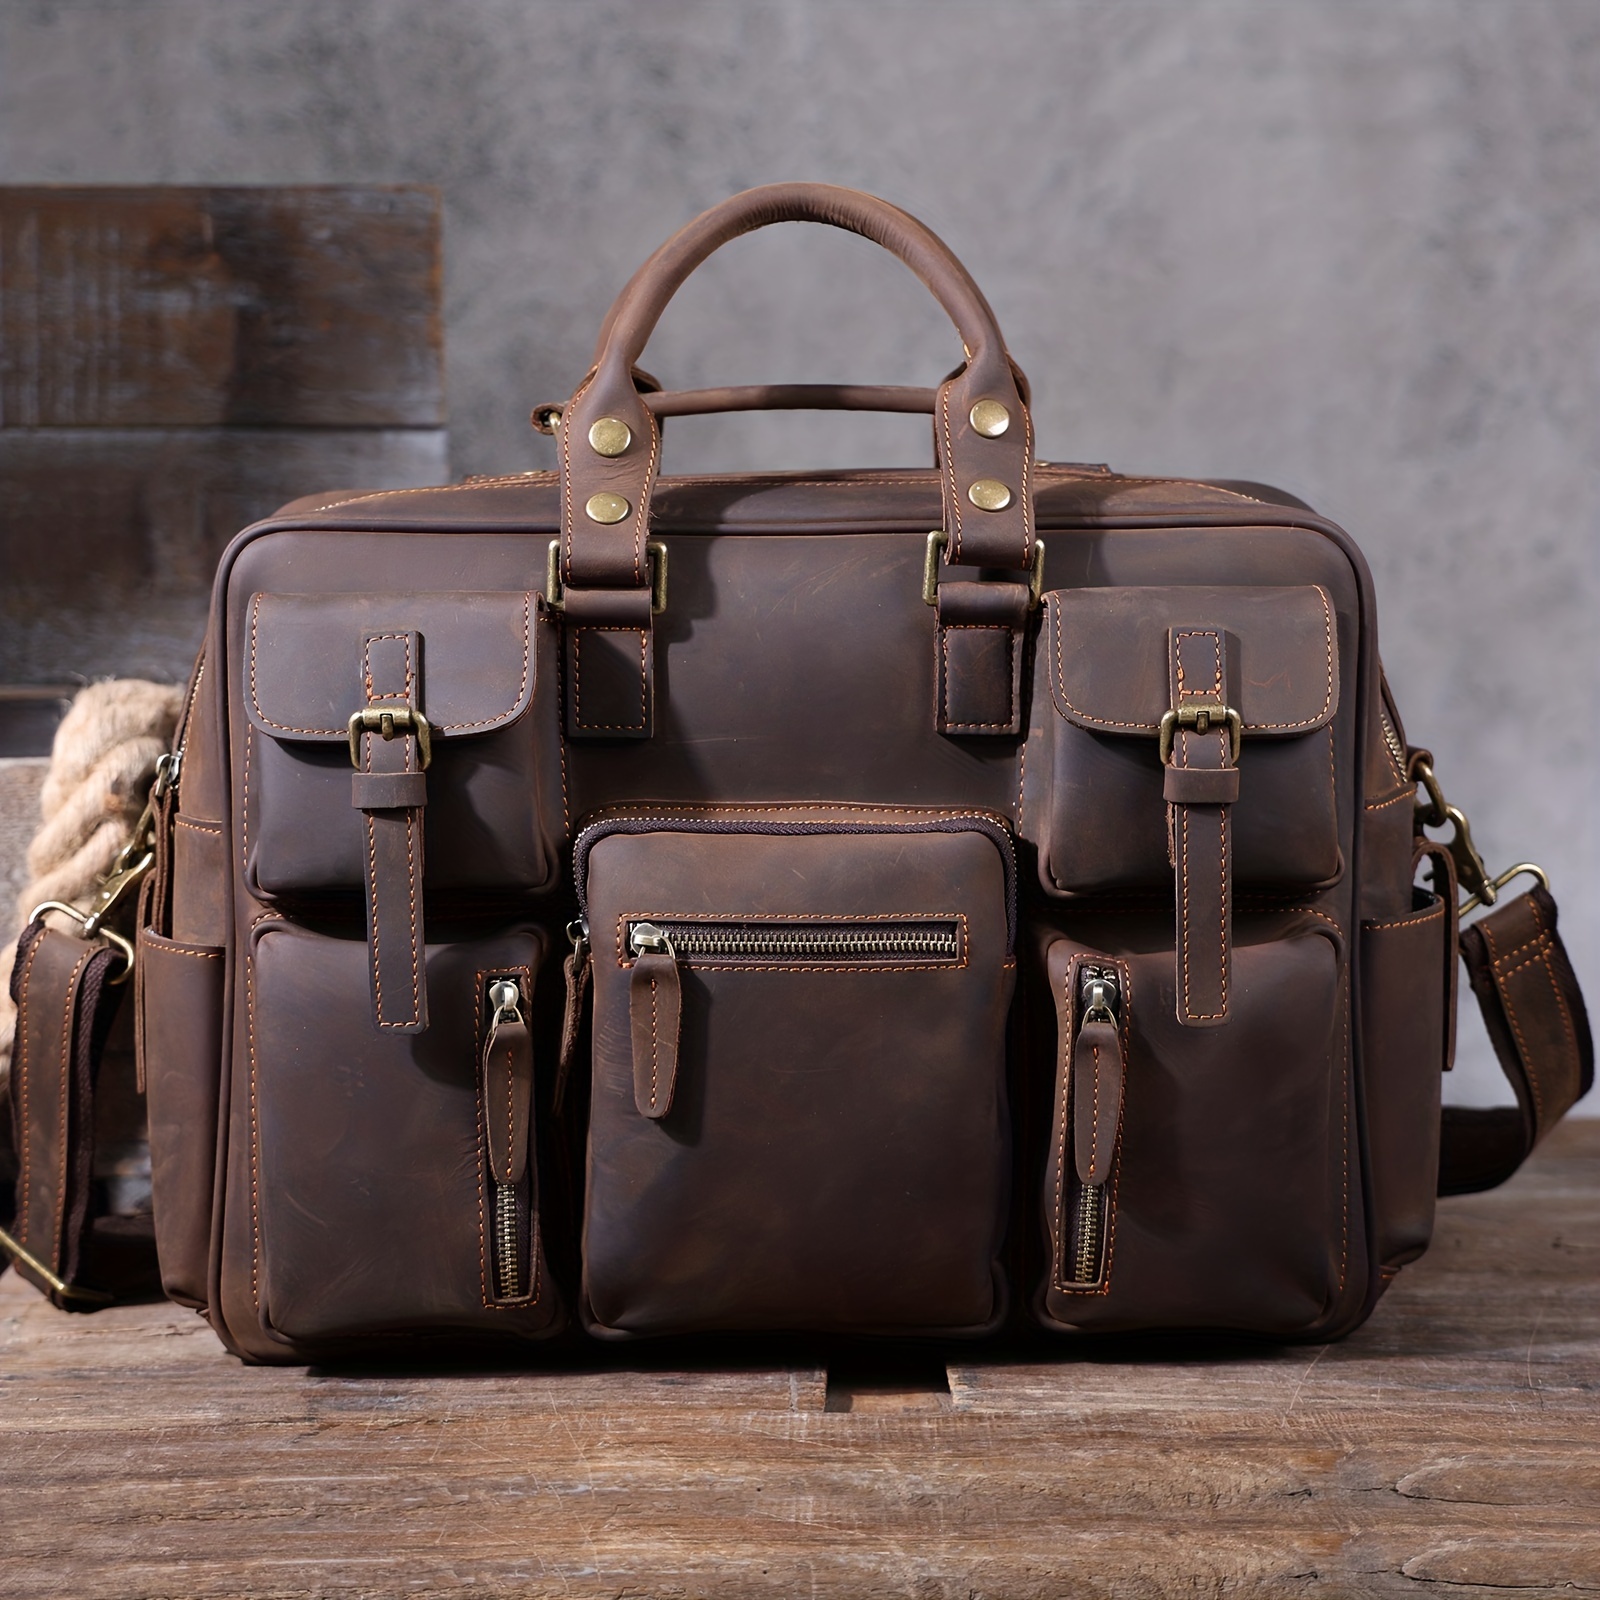 1pc Vintage Crossbody Briefcase Bag With Multiple Compartments & Laptop Sleeve For Business Trips & Traveling, Work Bags For Men\u002FWomen,